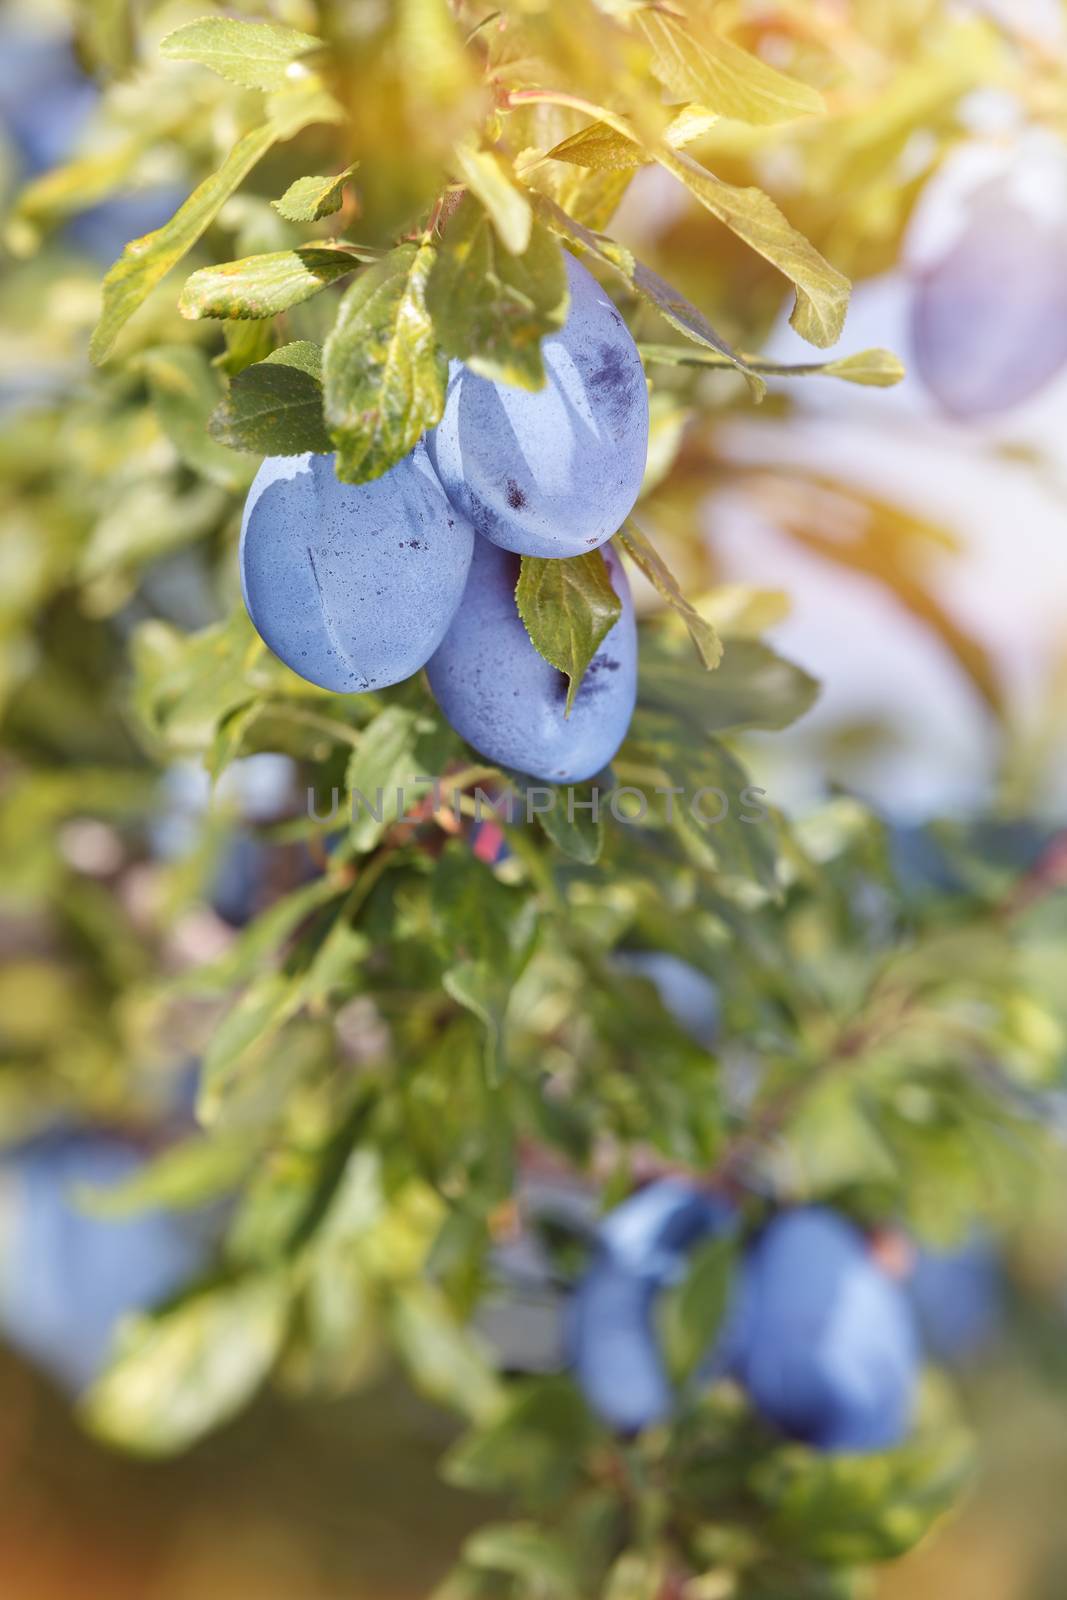 Plums growing in orchard, close up. Soft and blur style for background. A photo with very shallow depth of field